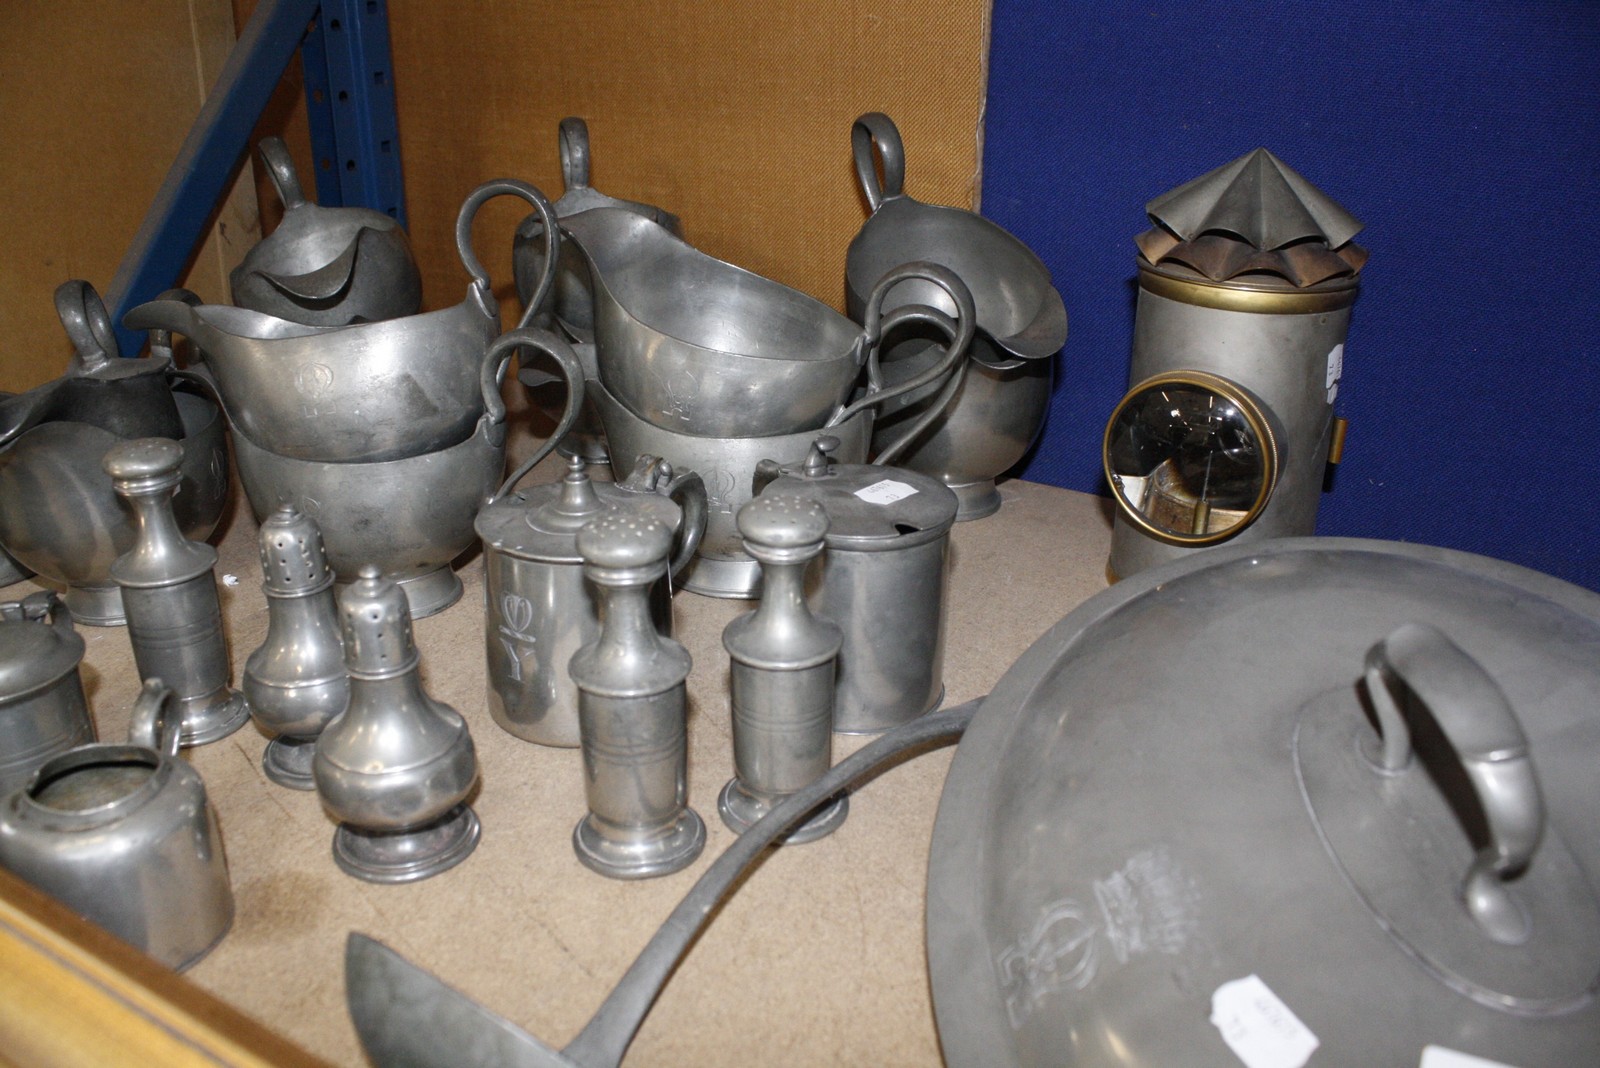 A quantity of pewter items to include condiments, gravy boats, tankards, tureen covers etc and a